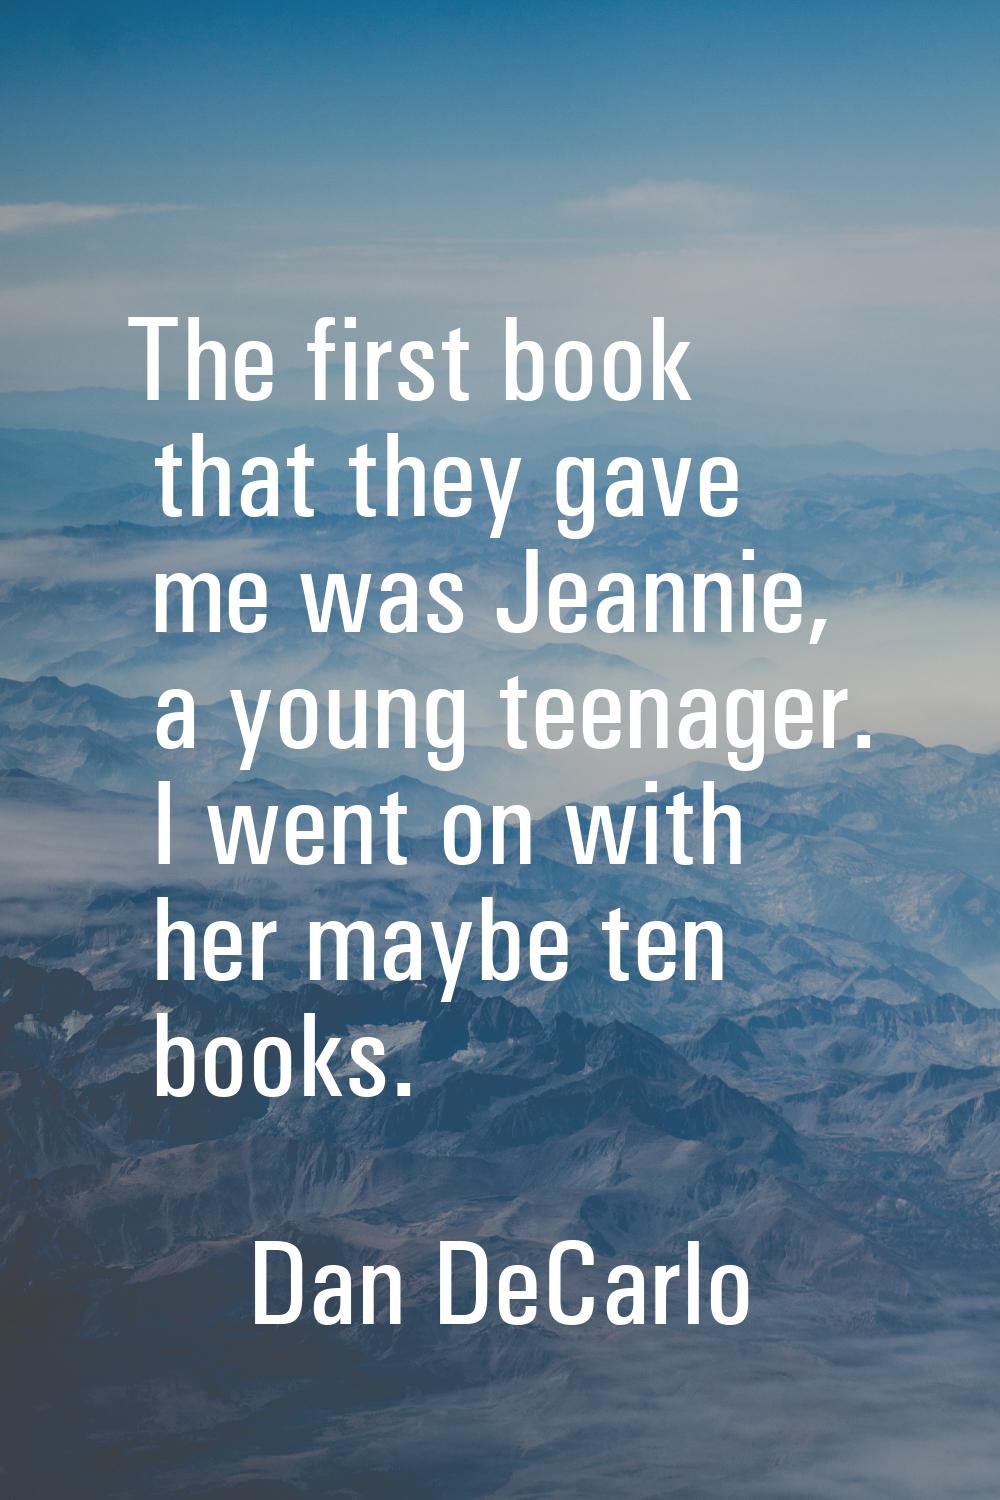 The first book that they gave me was Jeannie, a young teenager. I went on with her maybe ten books.